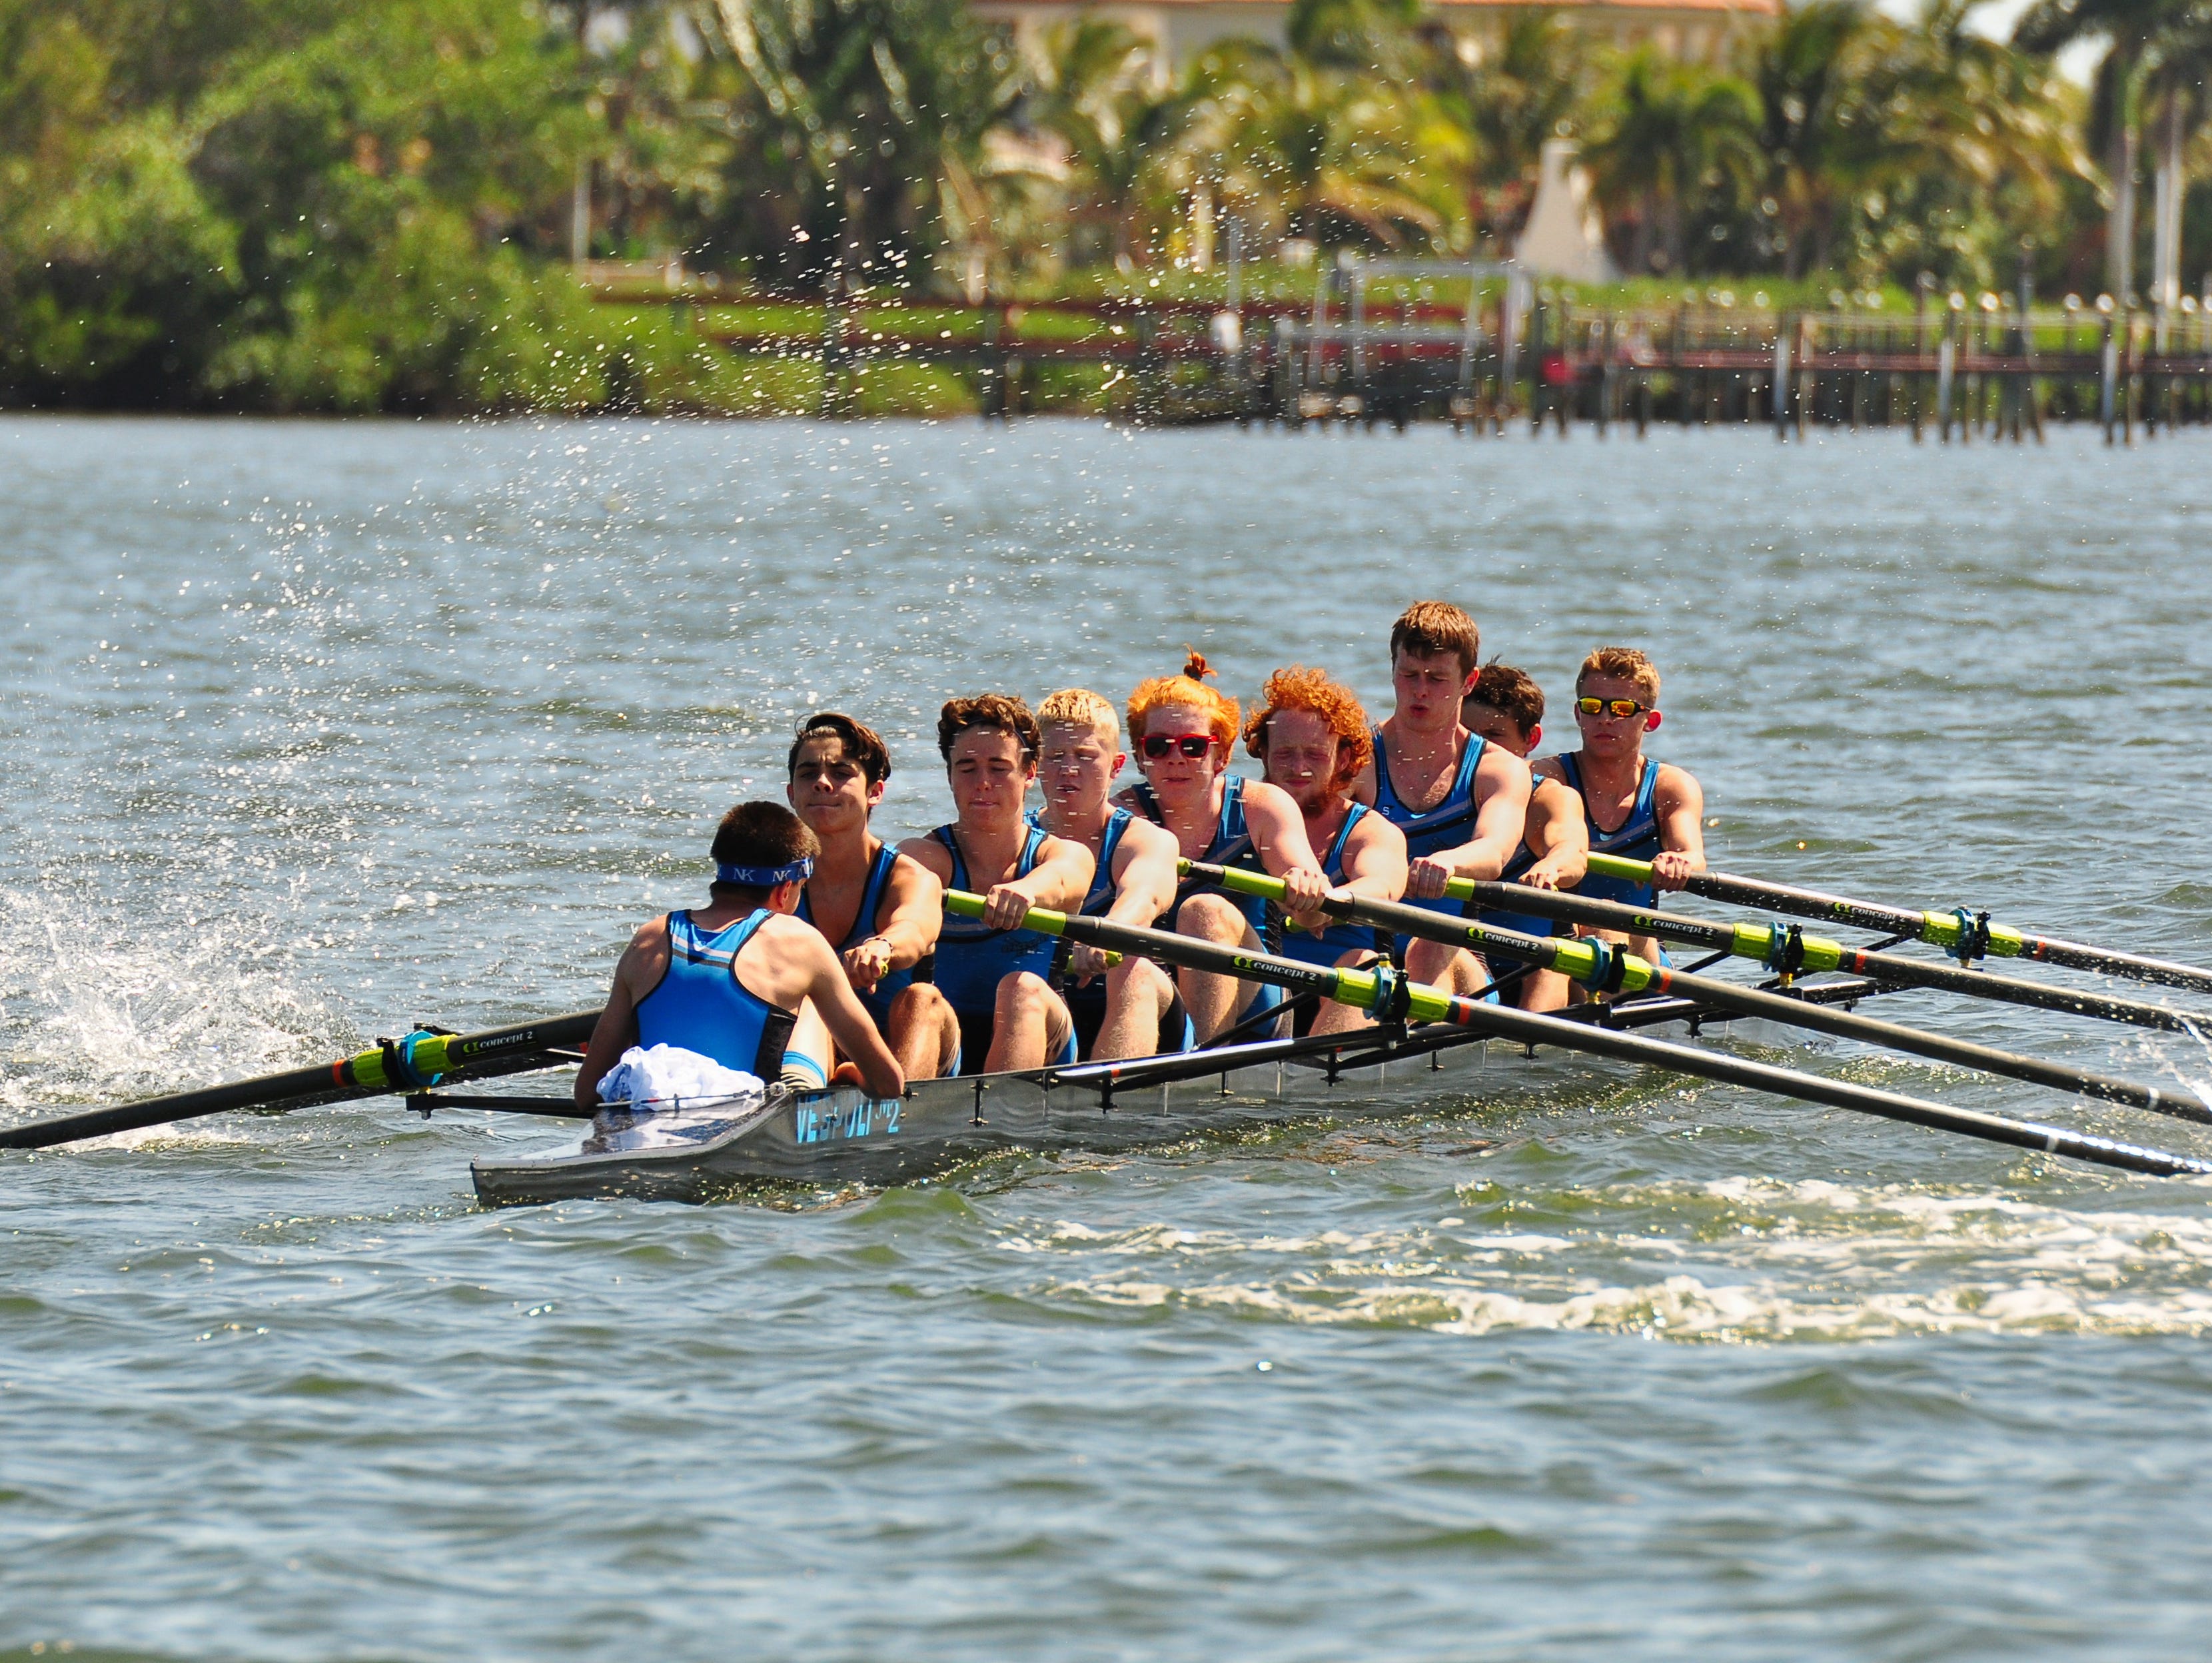 Space Coast Crew competes on the Banana River, just north of Mathers Bridge. Photo by Paul Markum.